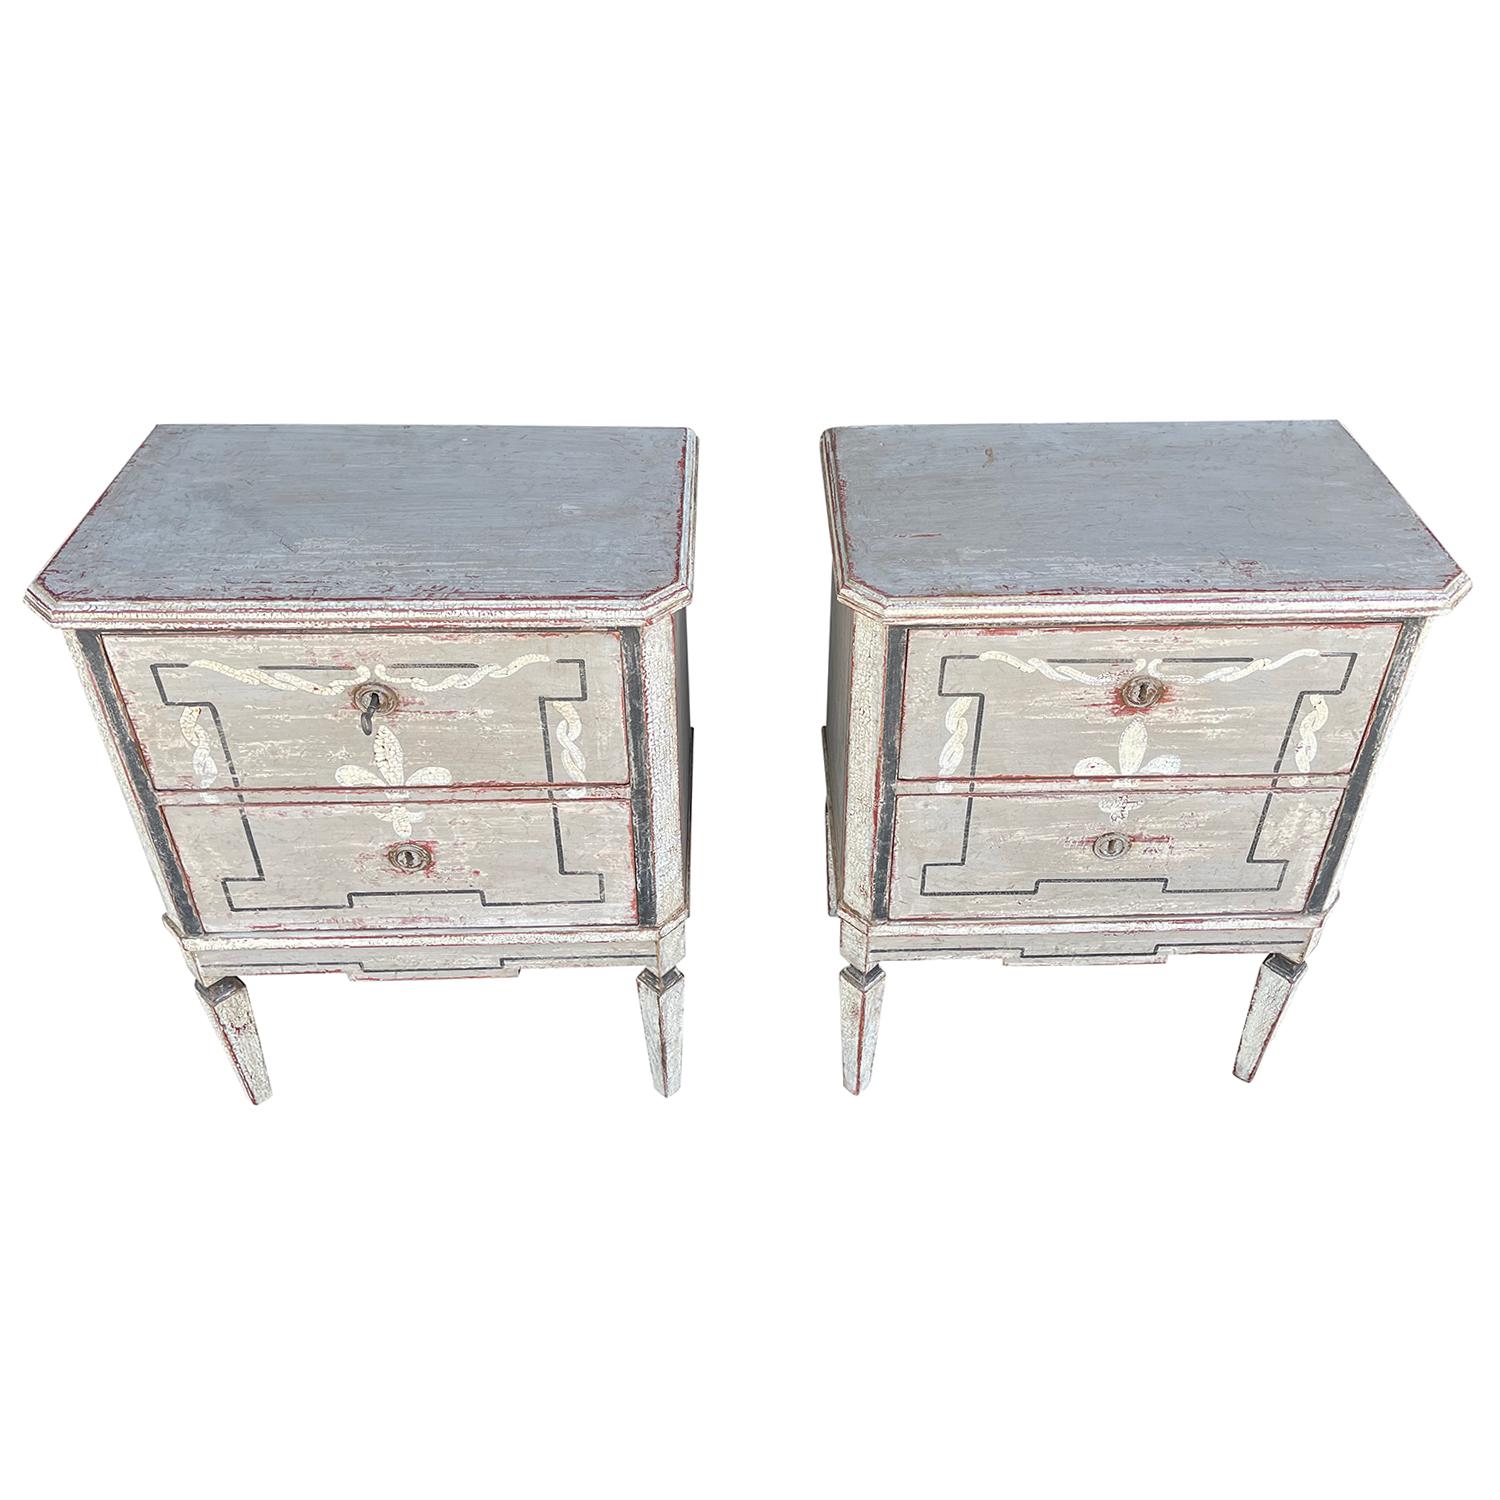 An antique pair of small hand carved Swedish Gustavian chests of drawers made of Pinewood with a dark grey painted finish, Fleur de Lys decor and square tapered legs, in good condition. The Scandinavian nightstands, bedside tables have two drawers